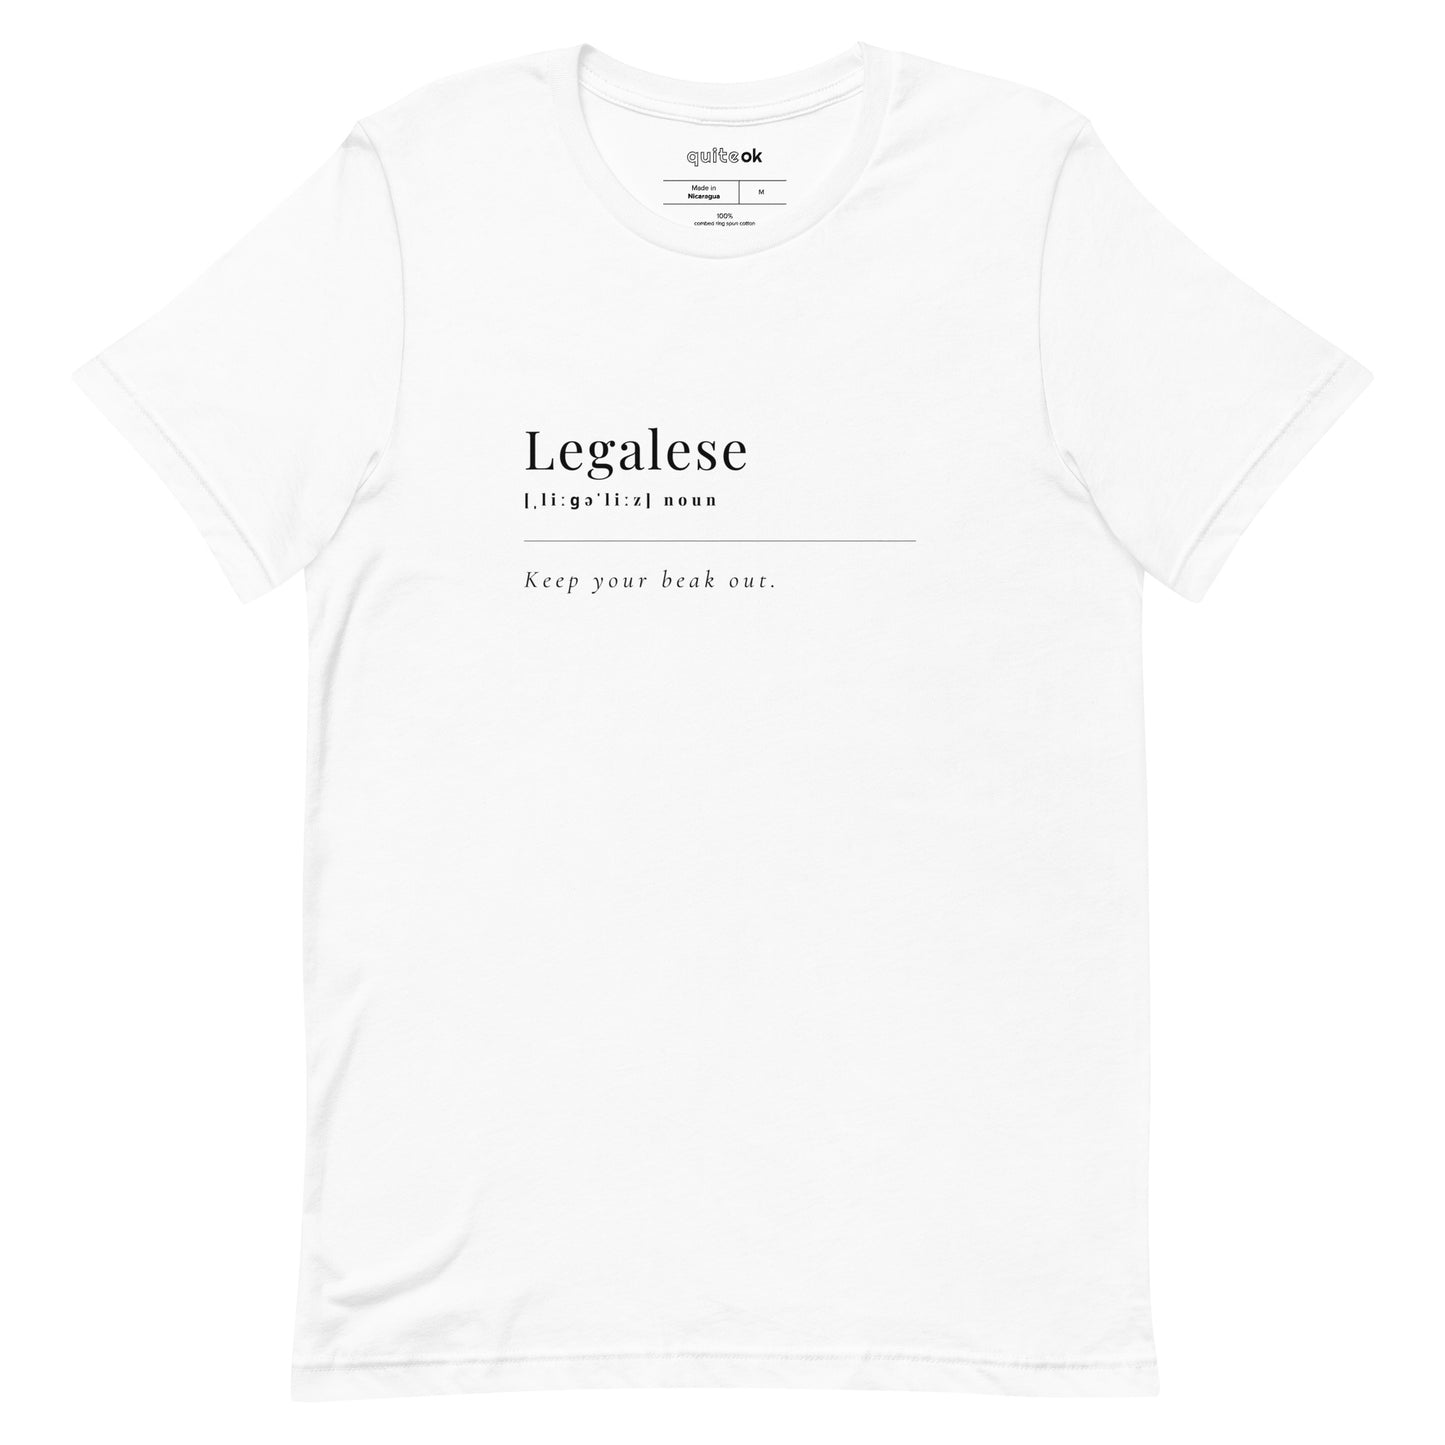 Legalese Comedy Definition T-Shirt